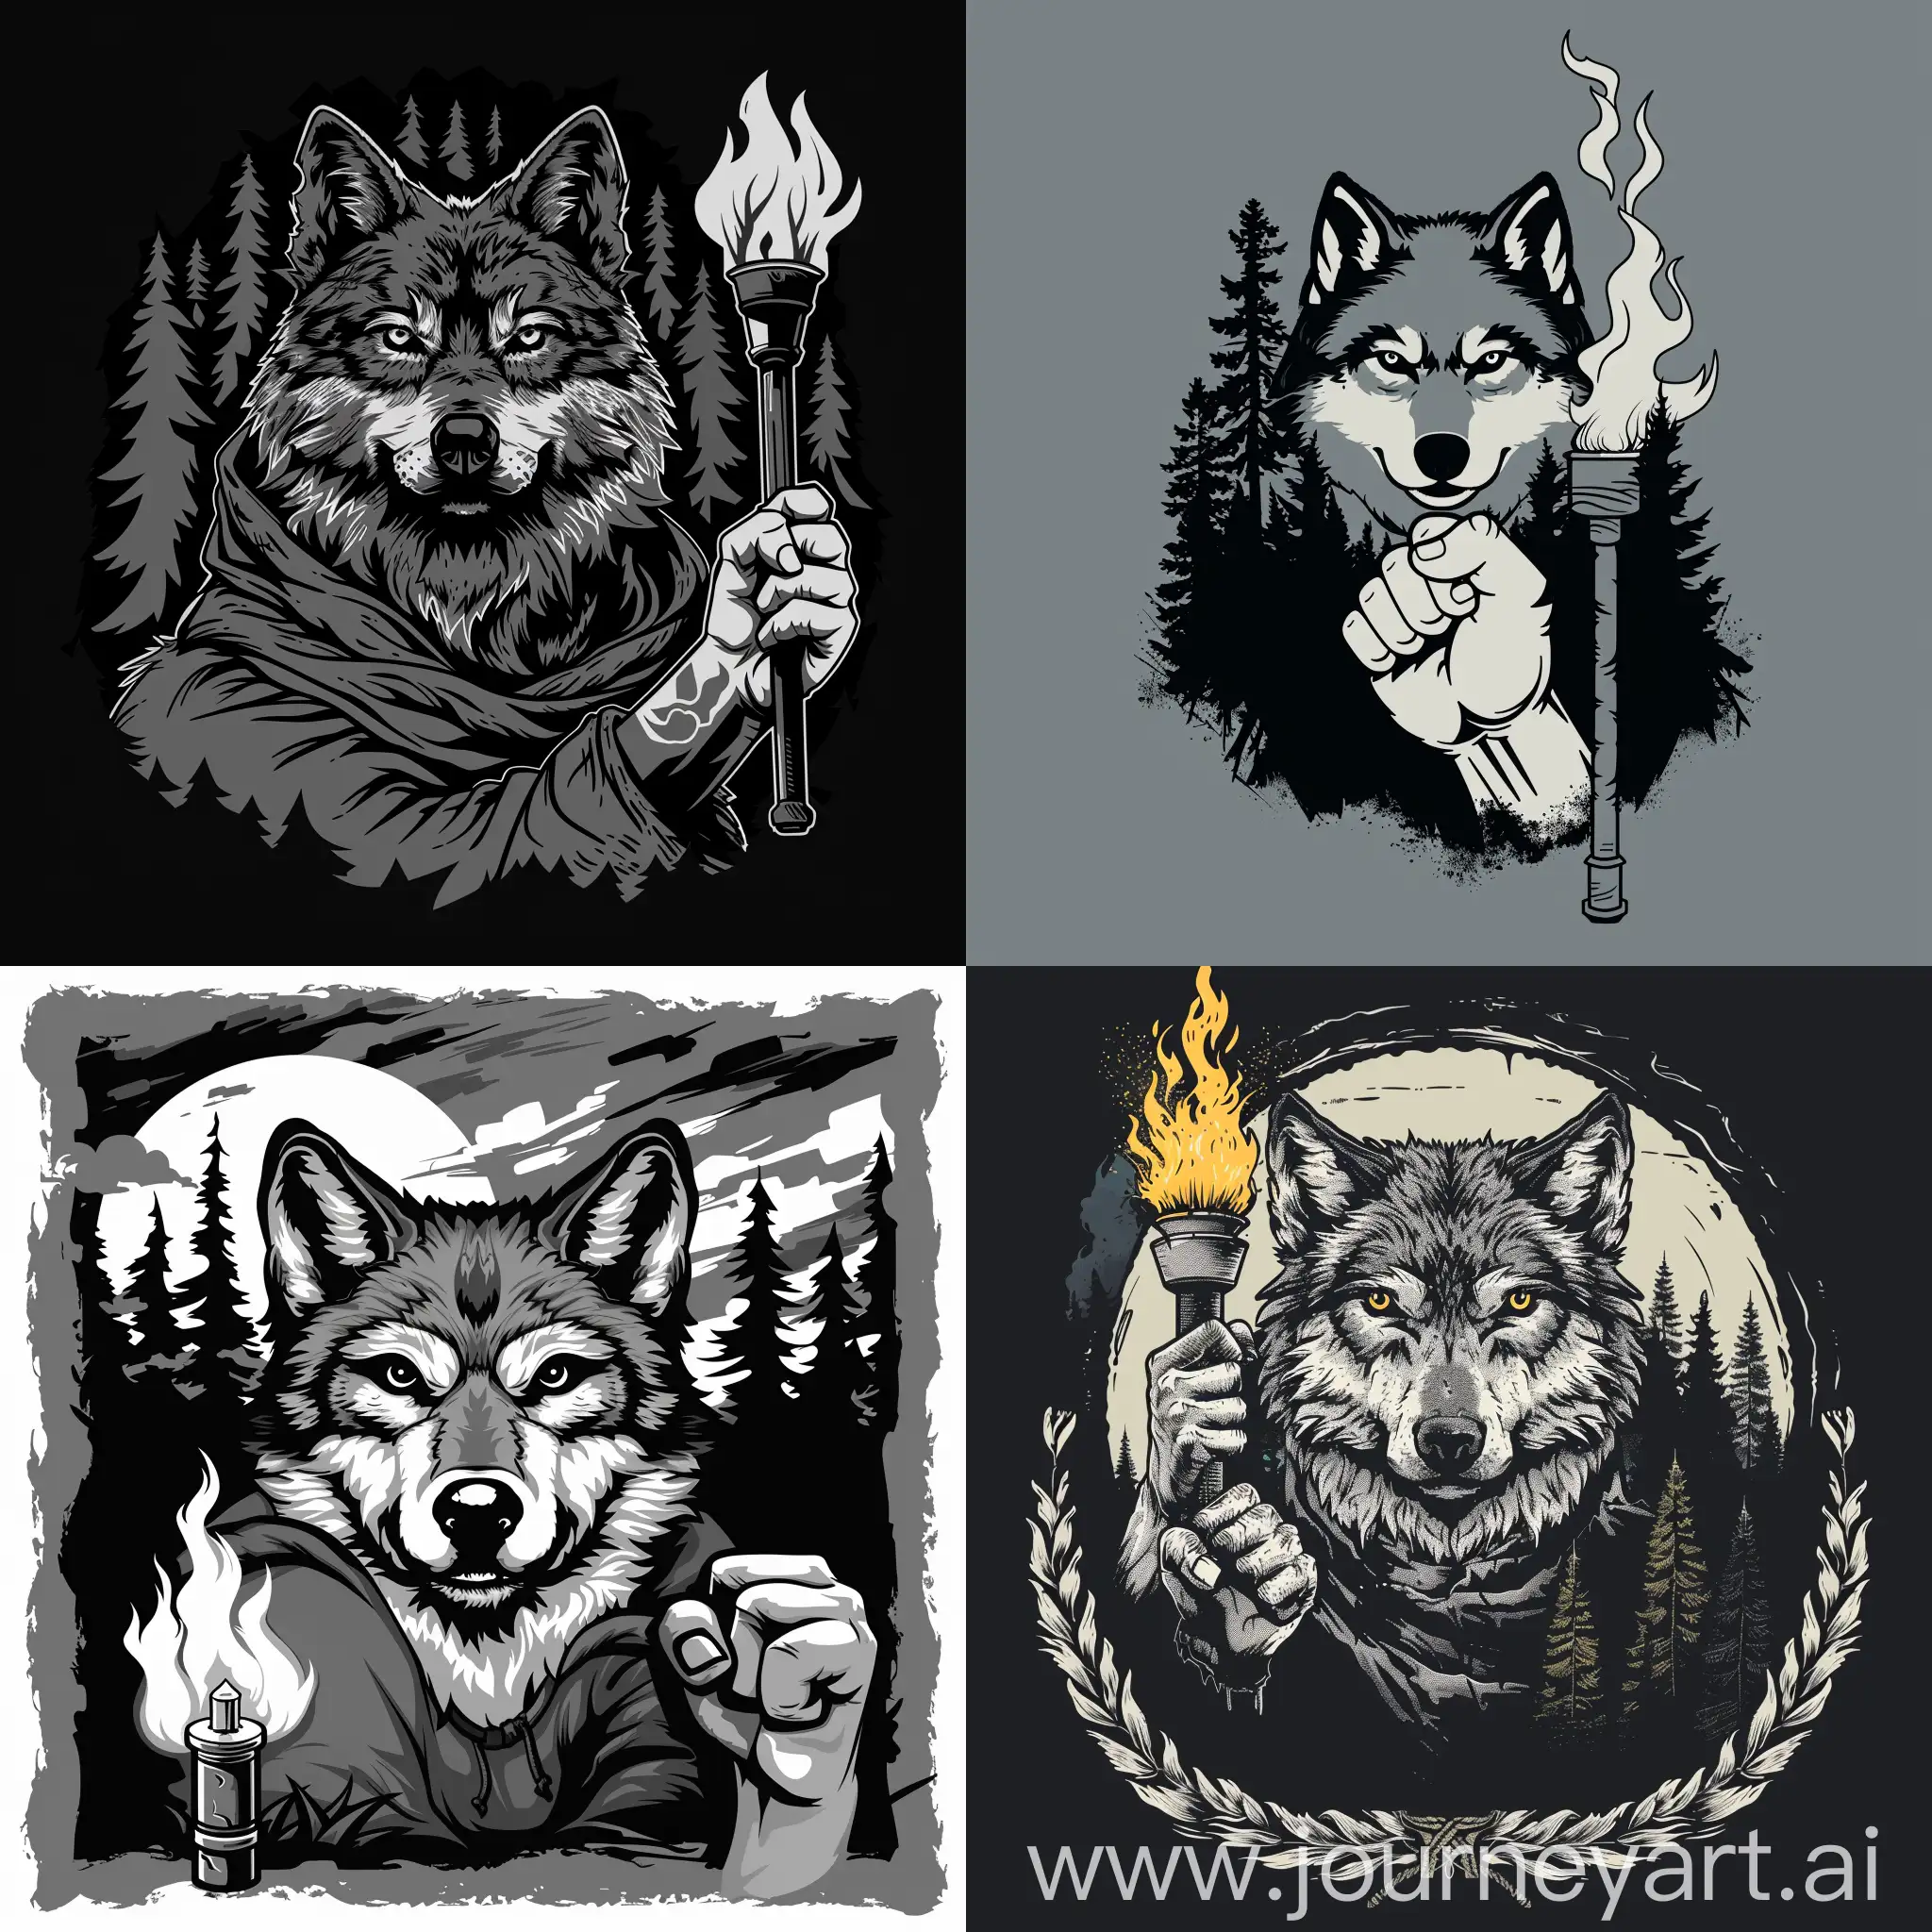 wolf face on the front, squezee fist, torch, forest, cartoon, black, white, gray colour